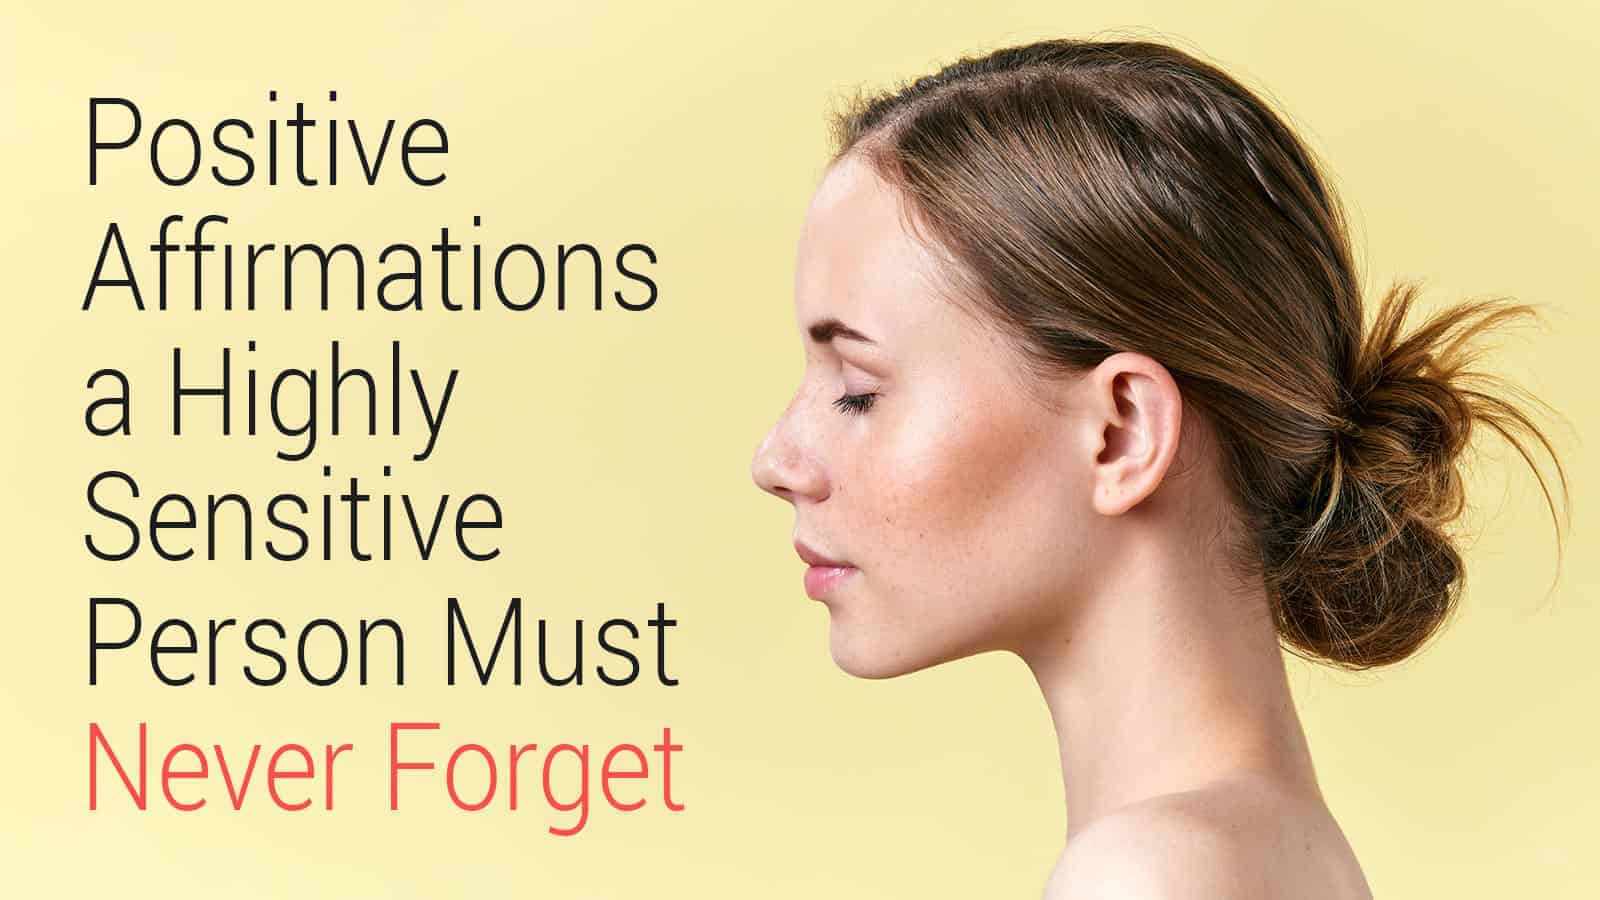 Positive Affirmations a Highly Sensitive Person Must Never Forget